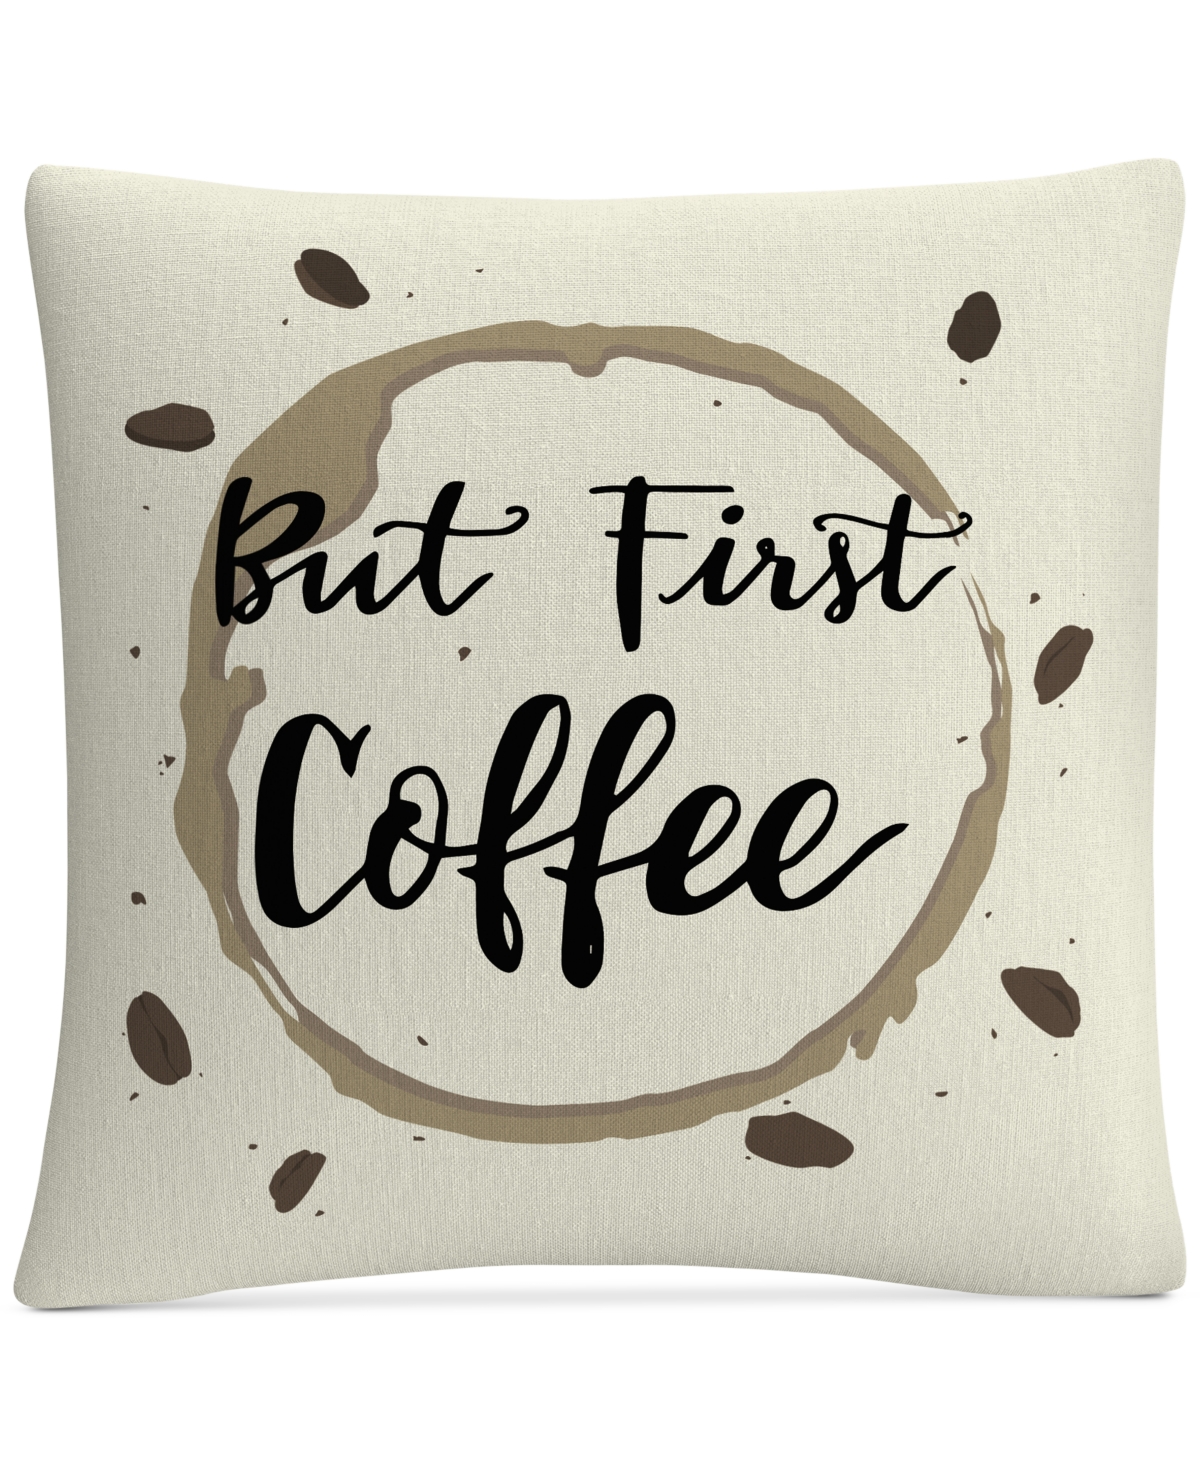 Abc But First Coffee Decorative Pillow, 16 x 16